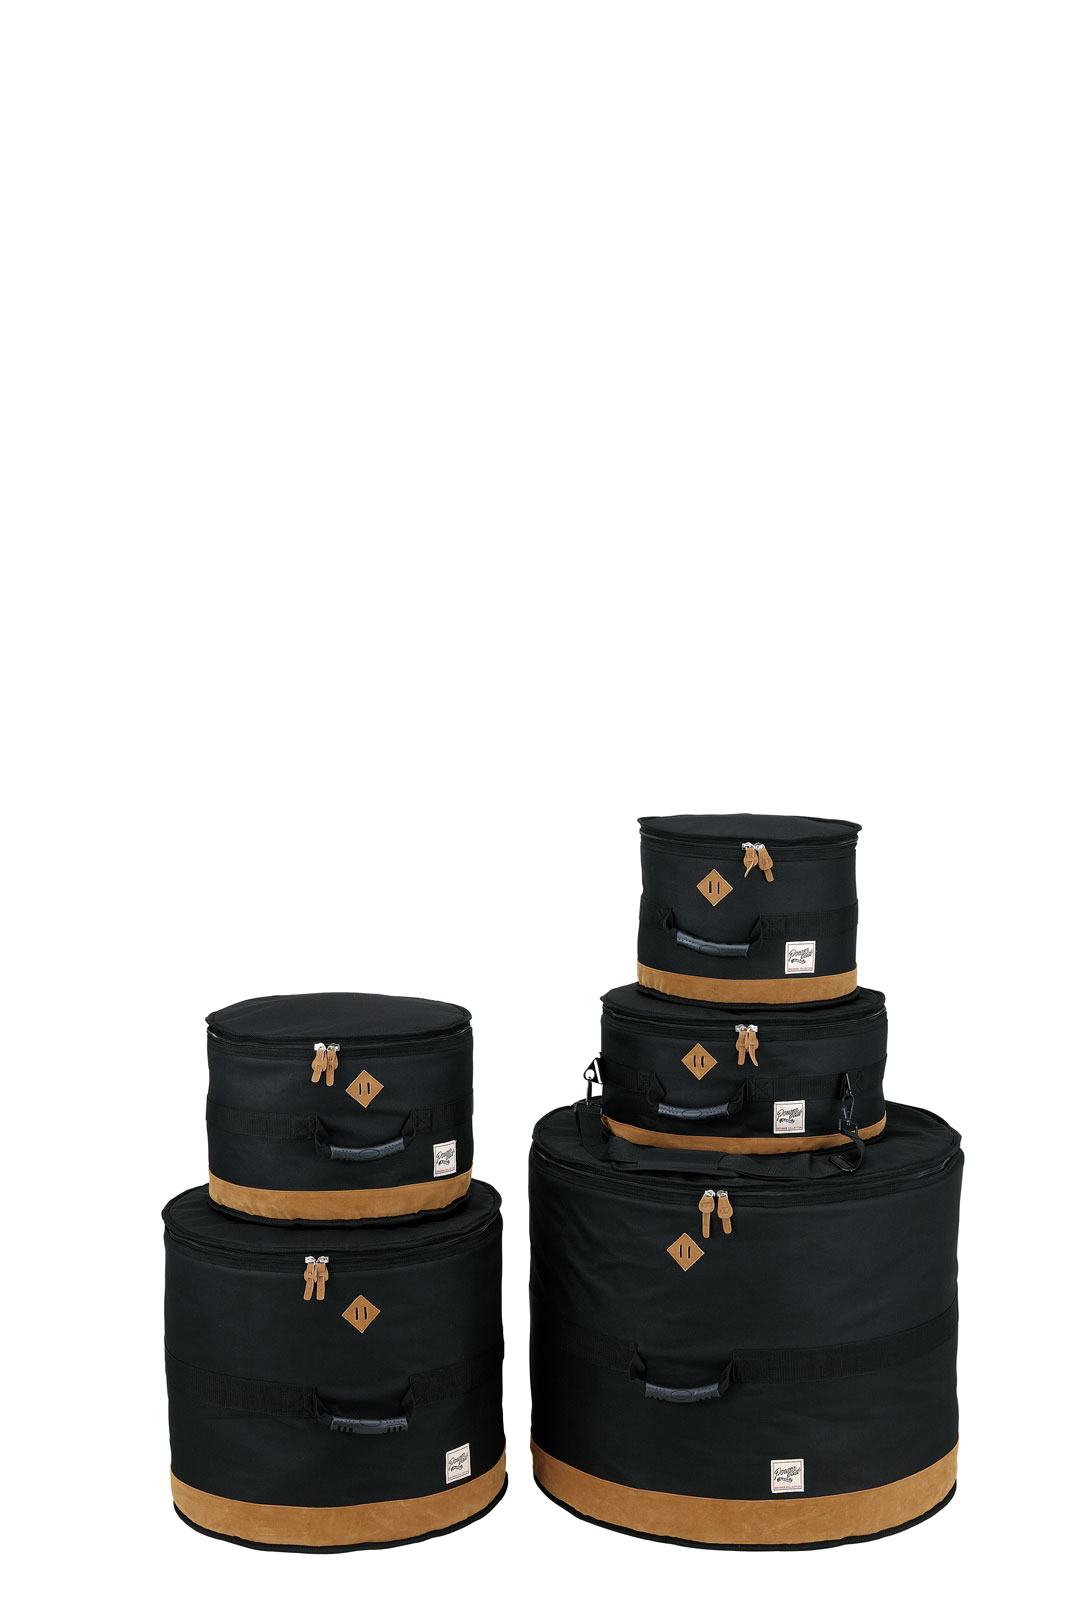 TAMA POWER PAD DESIGNER COLLECTION DRUM BAG SET FOR 5PC DRUM KIT WITH 22